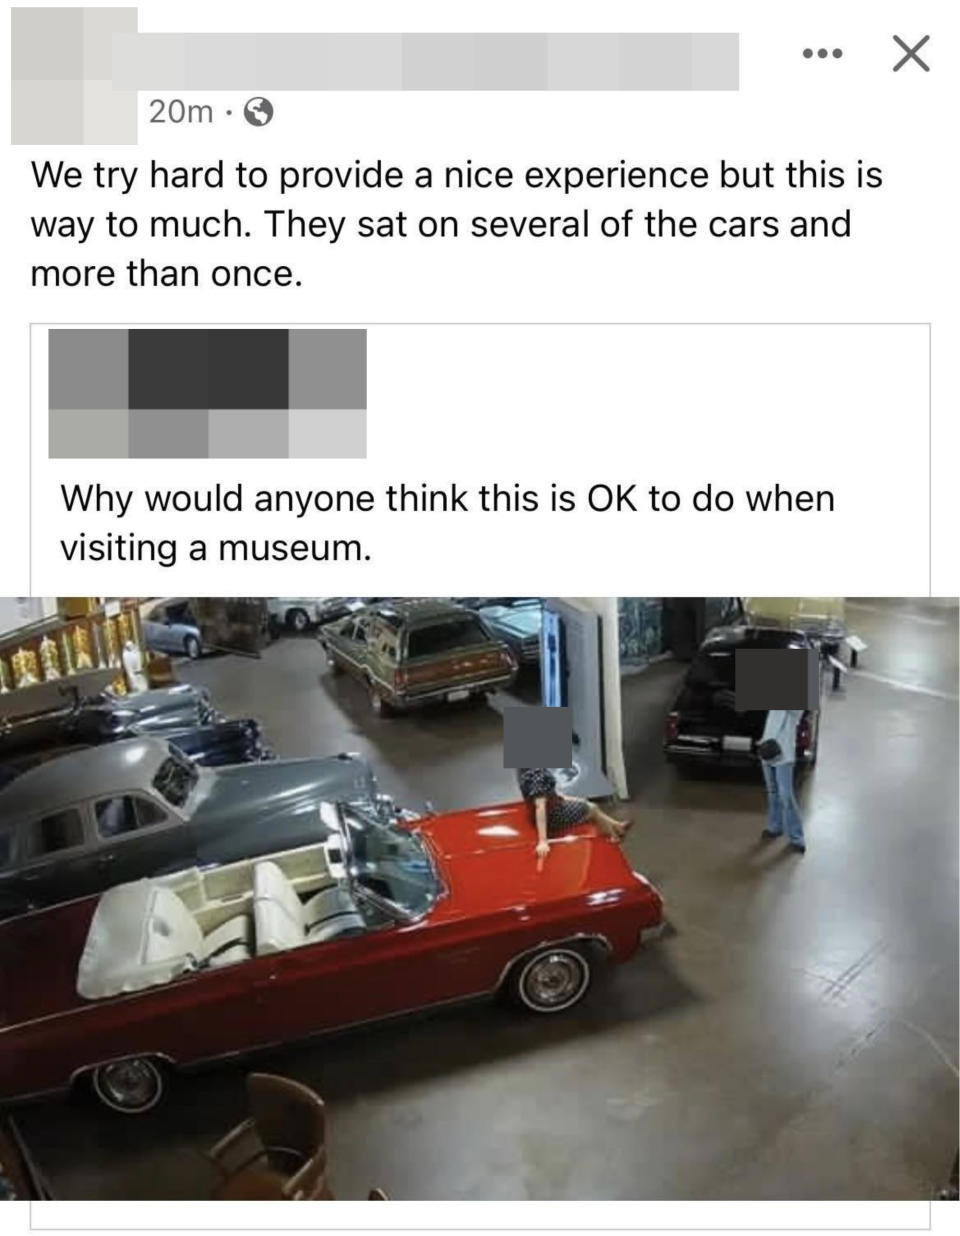 A picture shows someone sitting on a classic car at a museum, and an employee says the person pictured did this on numerous cars and more than once